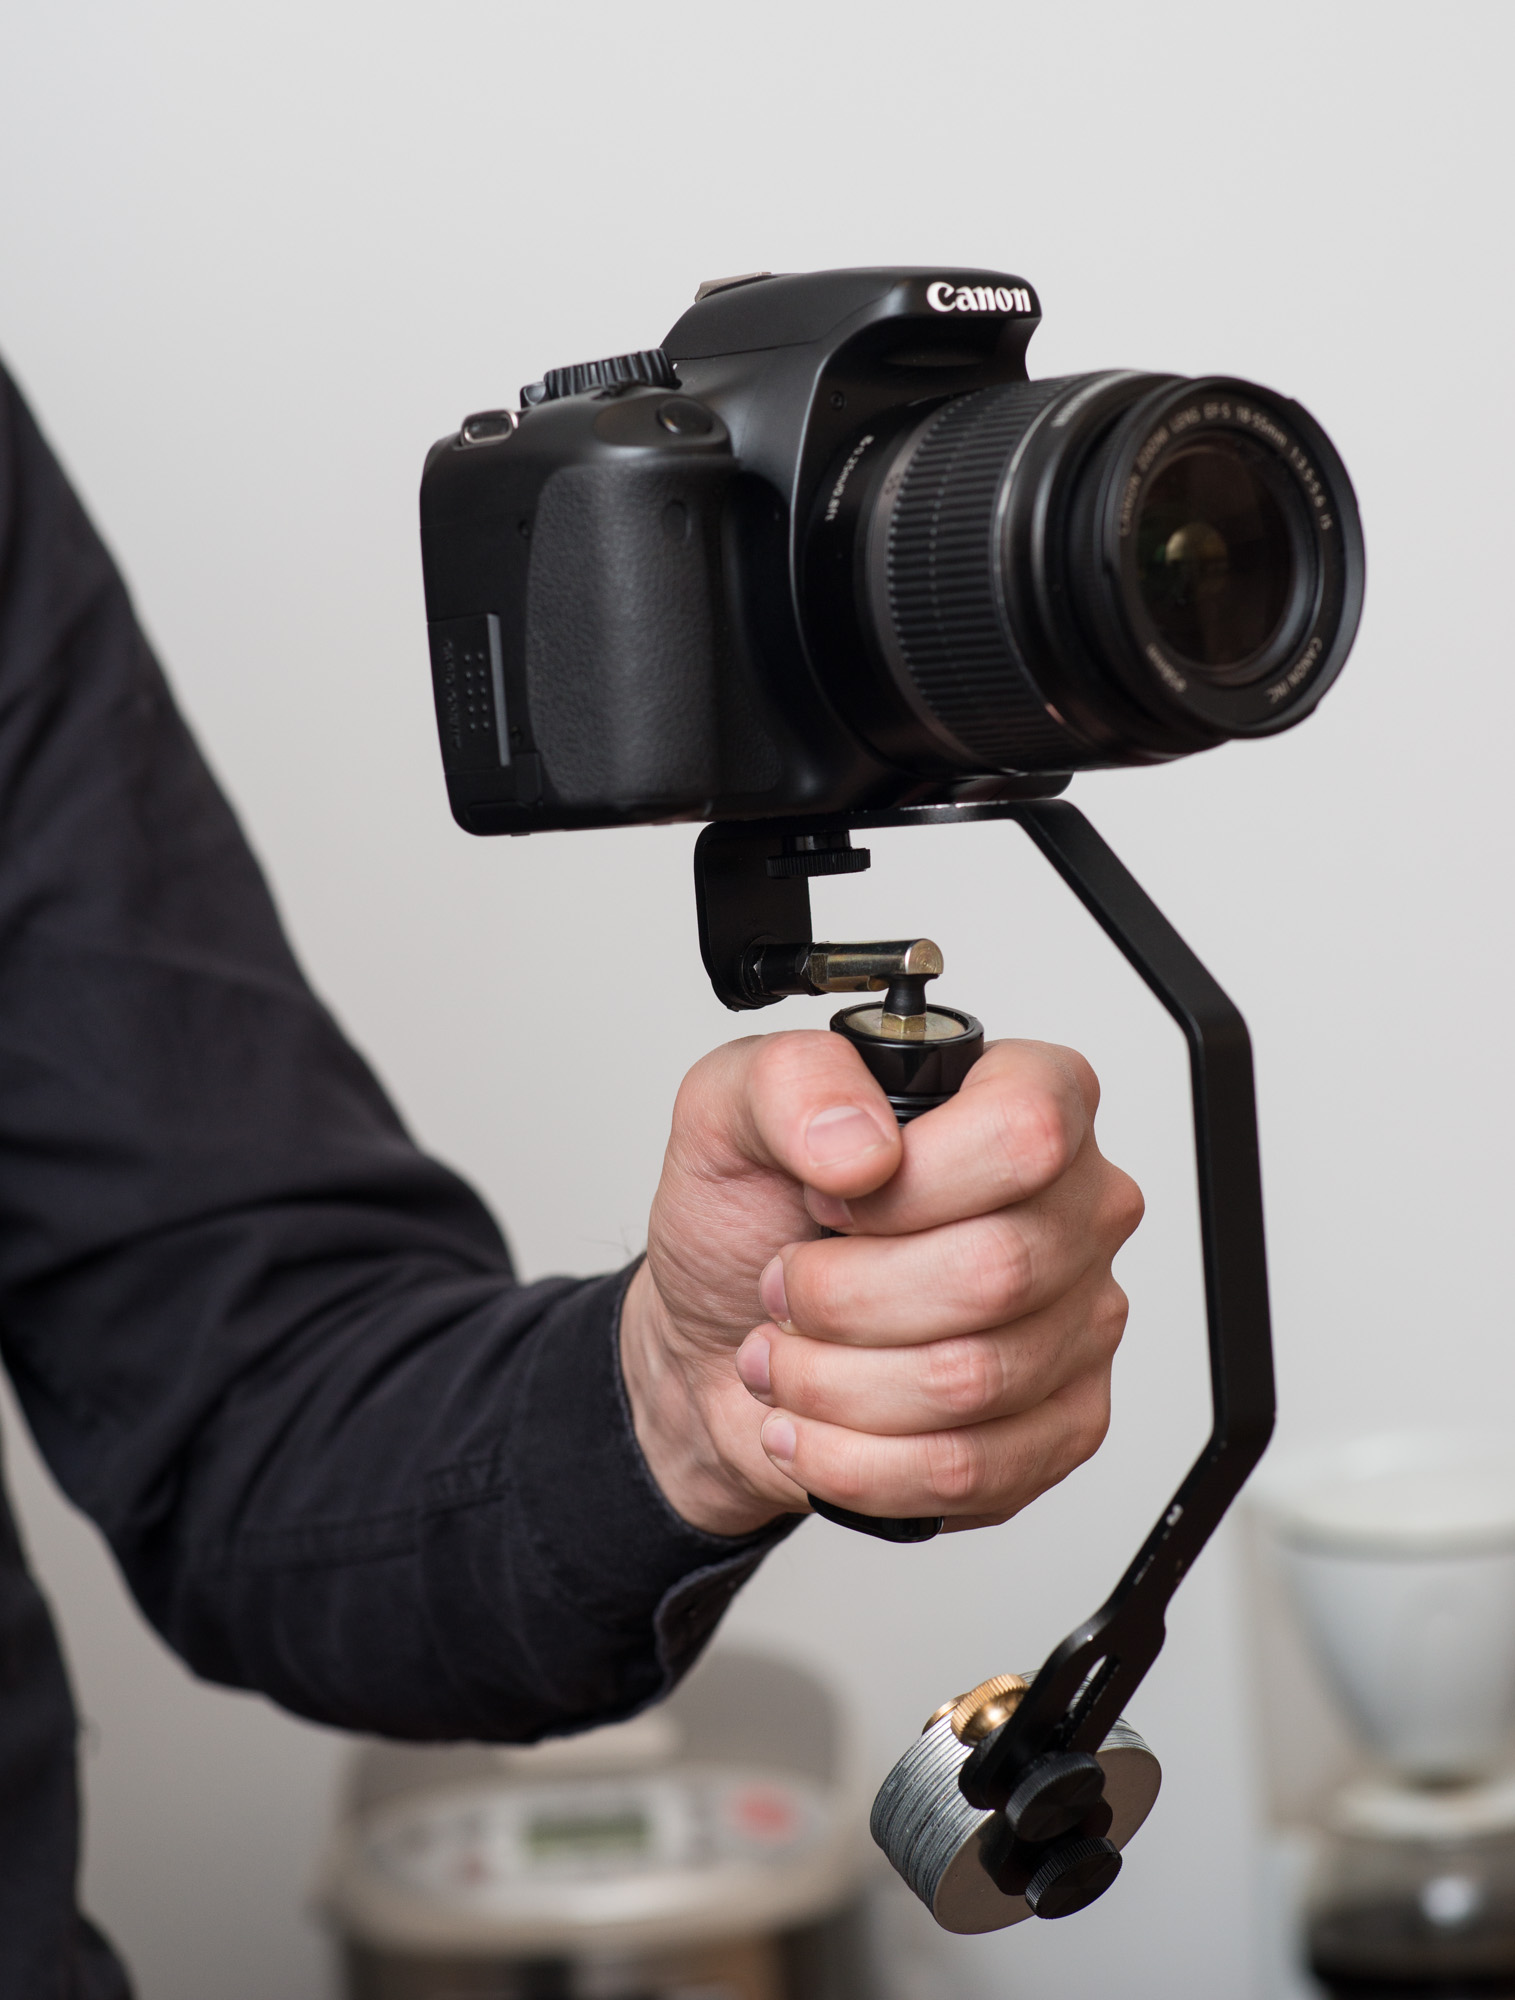 Review: The Picosteady Video Camera Stabilizer